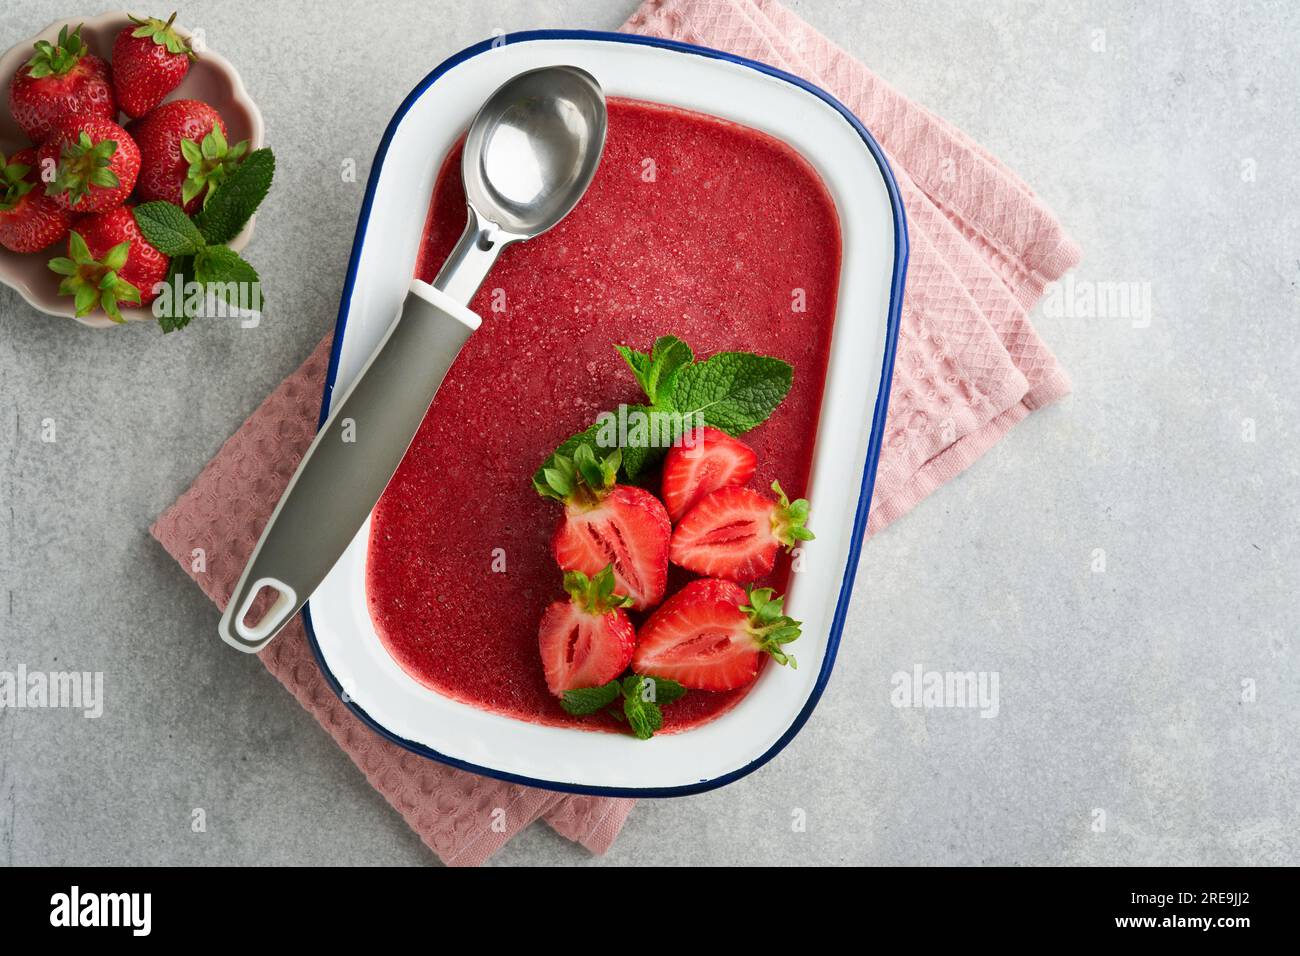 Strawberry granita or fresh berry sorbet in white rustic bowl on gray concrete background. Ice cream with strawberry and mint. Summer treat. Top view. Stock Photo